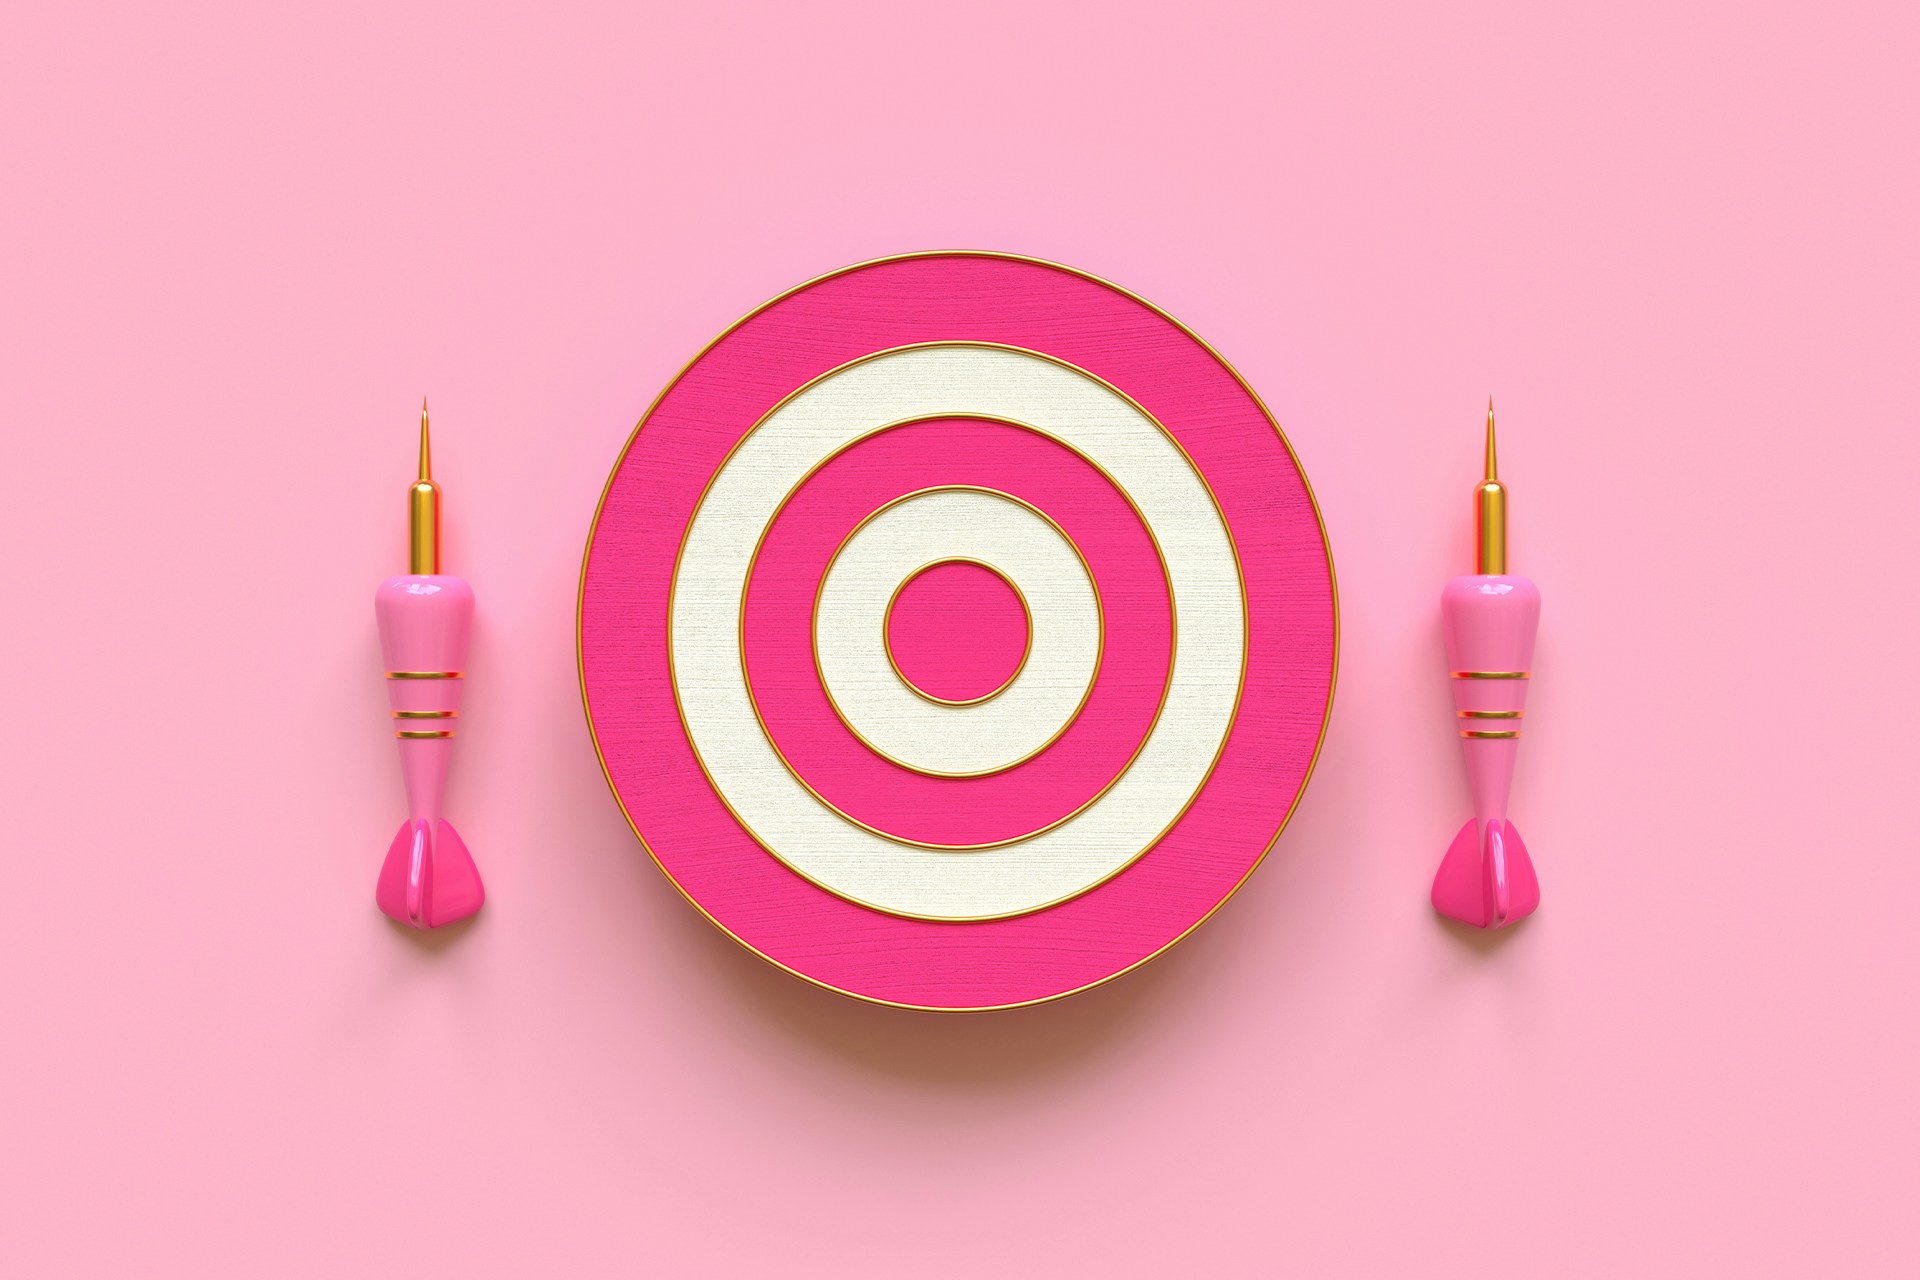 A bullseye dartboard with two pink darts next to it.